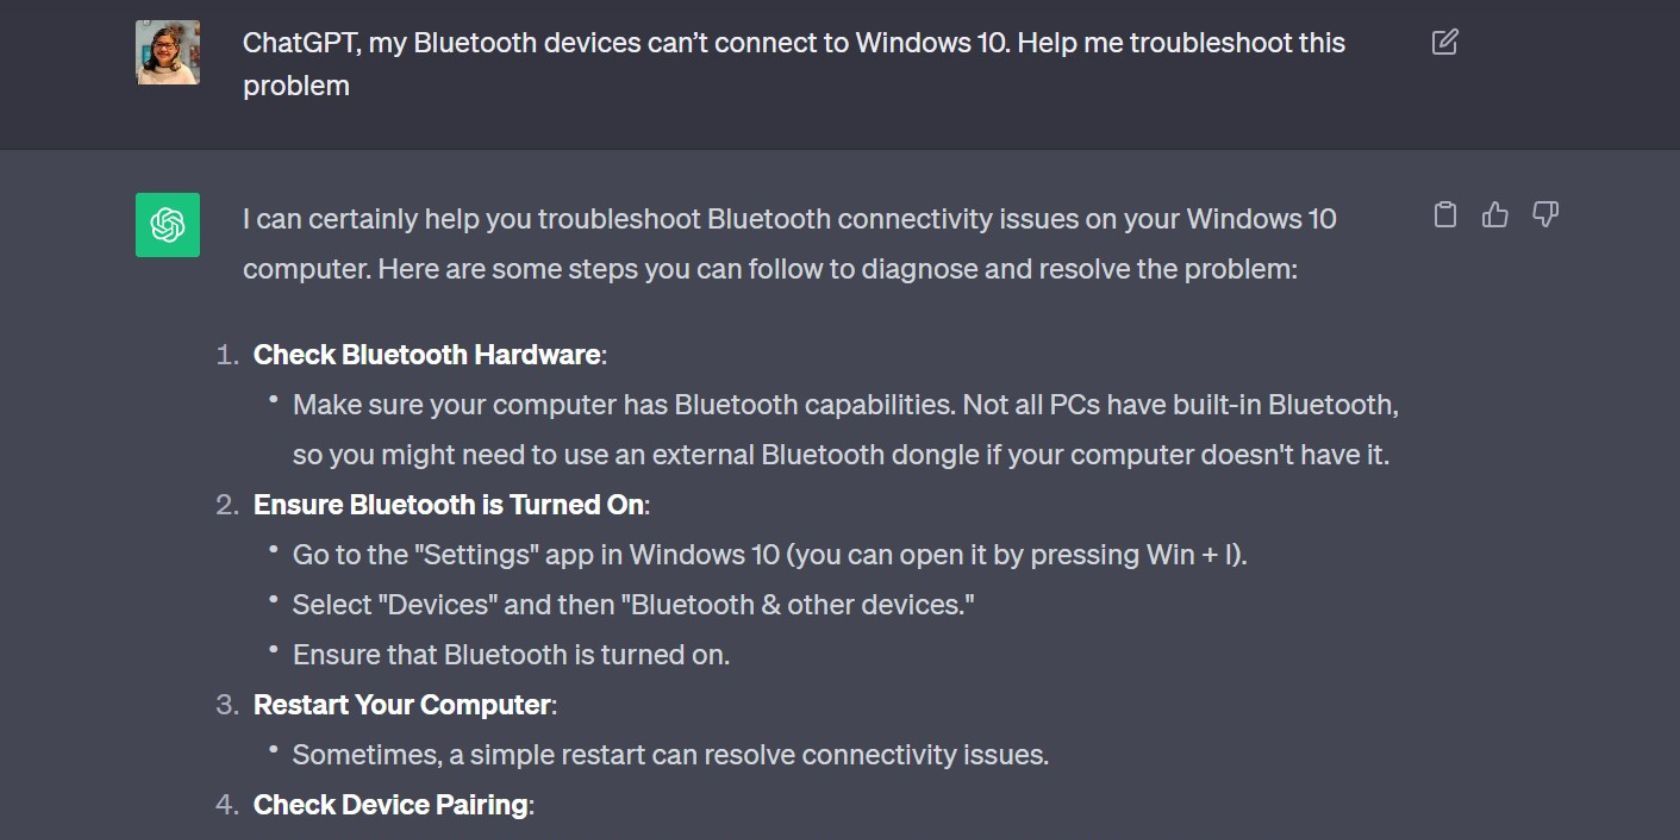 ChatGPT gives tips on troubleshooting Bluetooth connectivity